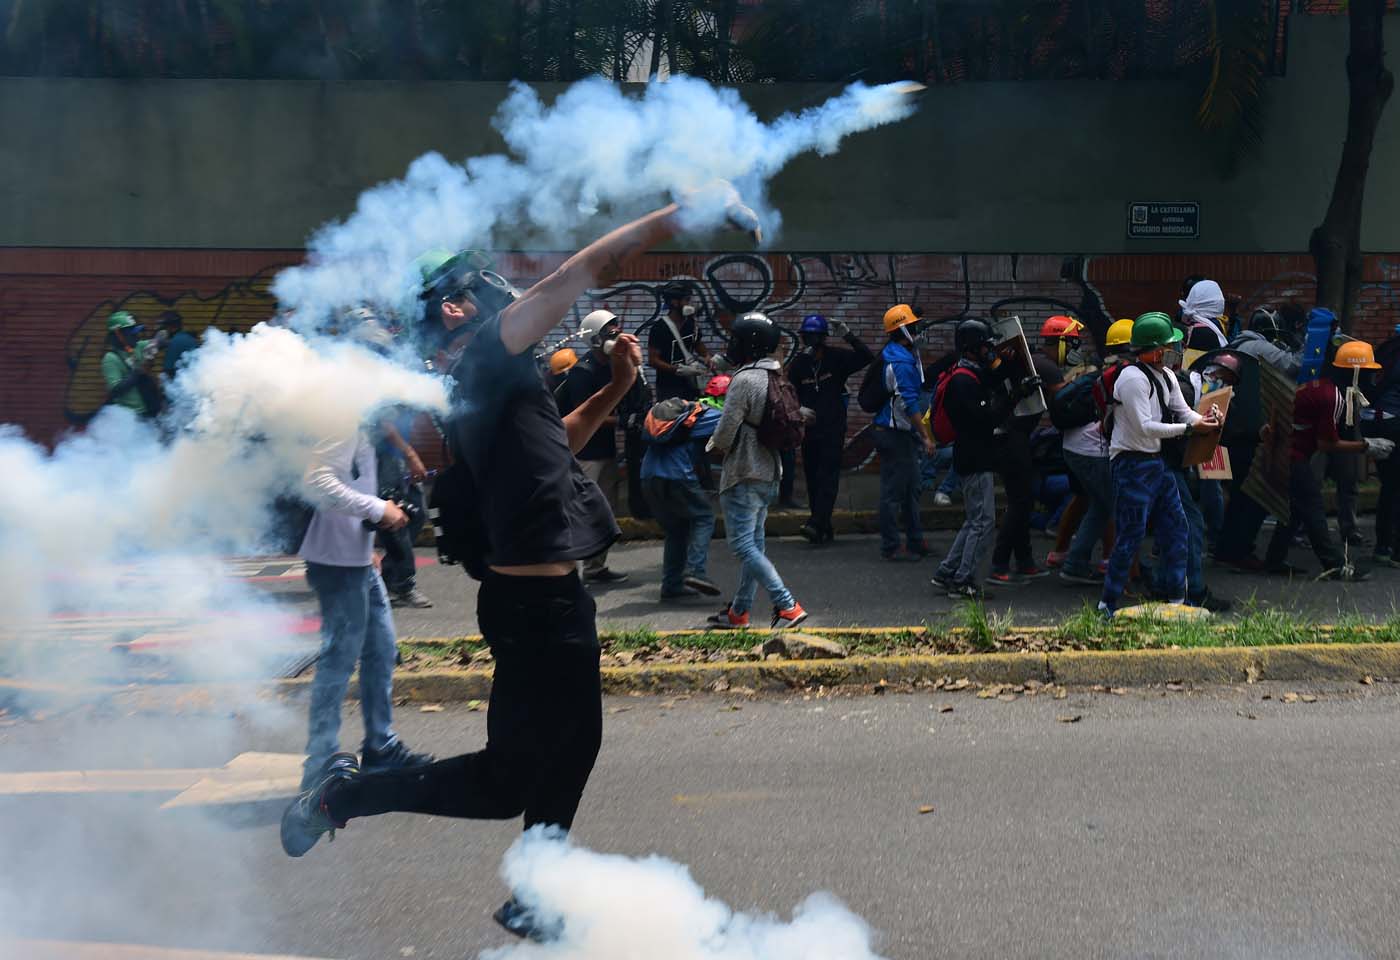 Venezuelan opposition activists clash with the police during a march against President Nicolas Maduro, in Caracas on May 1, 2017. Security forces in riot vans blocked off central Caracas Monday as Venezuela braced for pro- and anti-government May Day protests one month after a wave of deadly political unrest erupted. / AFP PHOTO / RONALDO SCHEMIDT